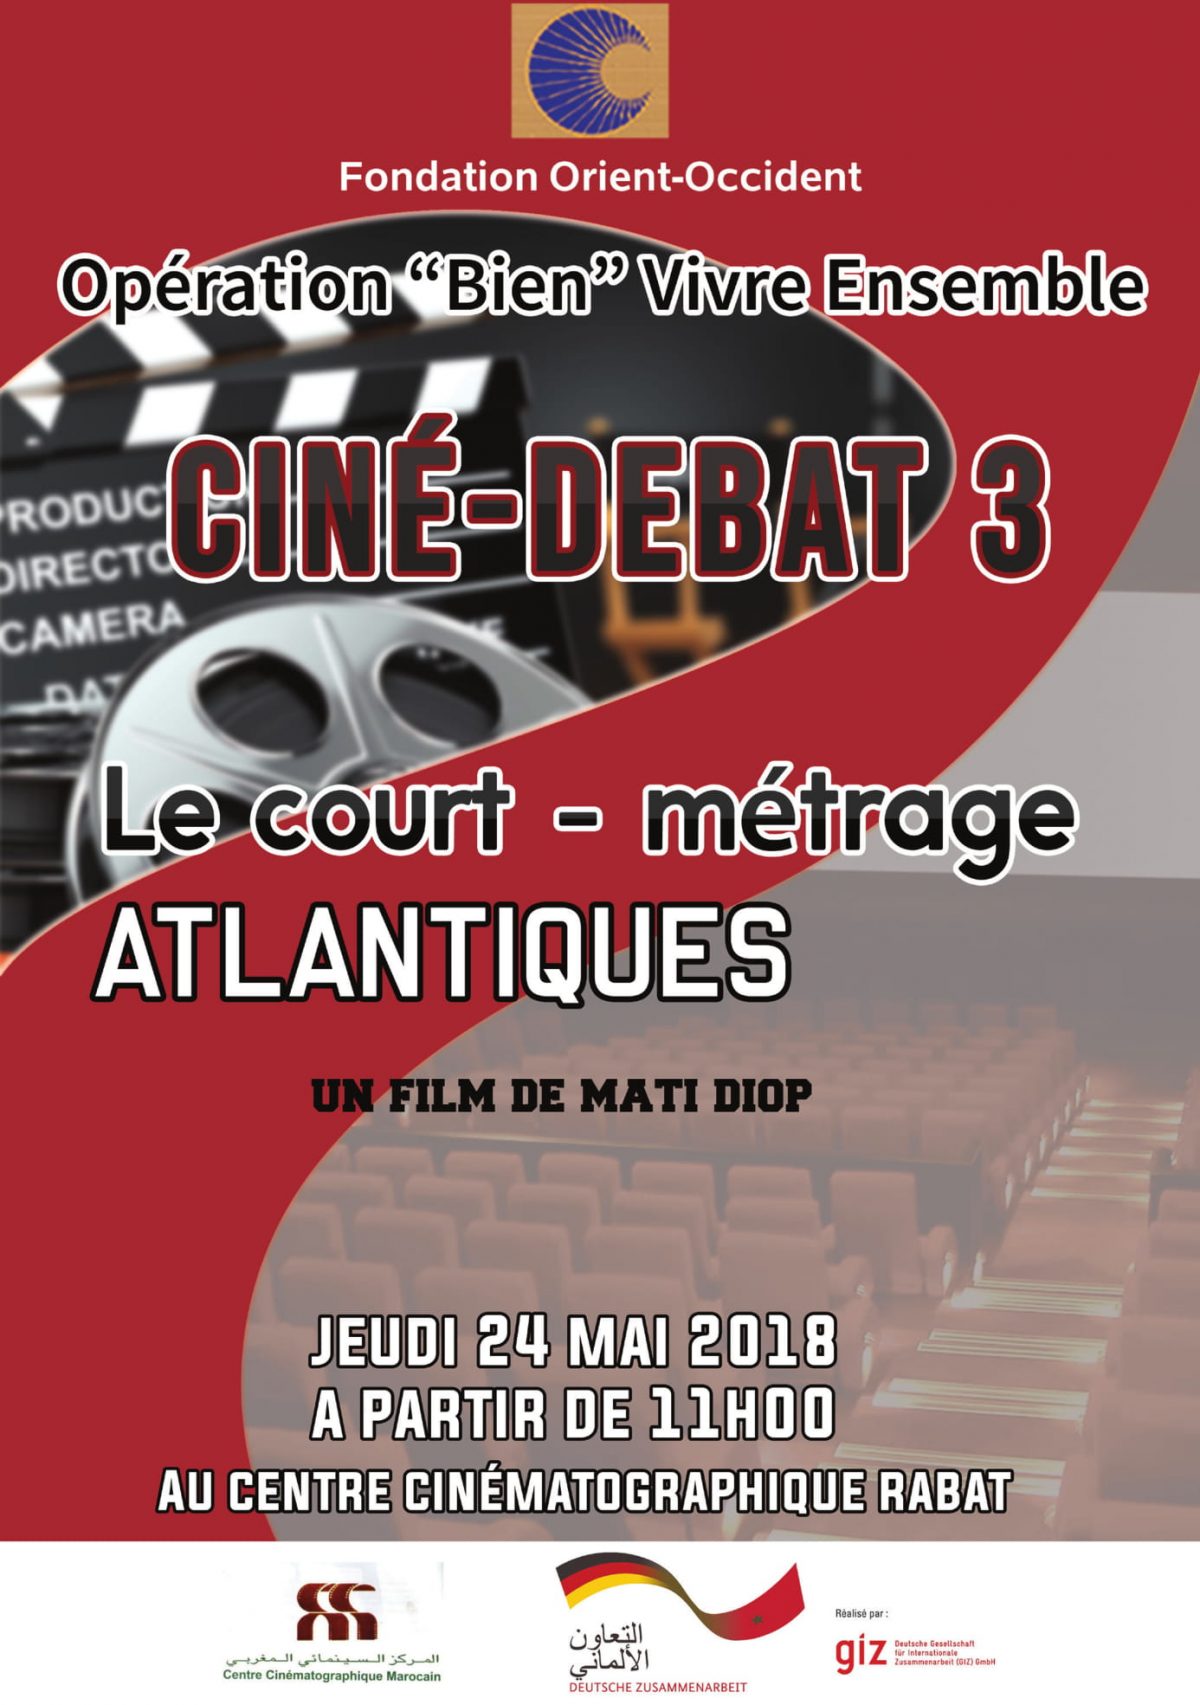 Projection of the short film “ATLANTIQUES” – Thursday the 24th of May 2018